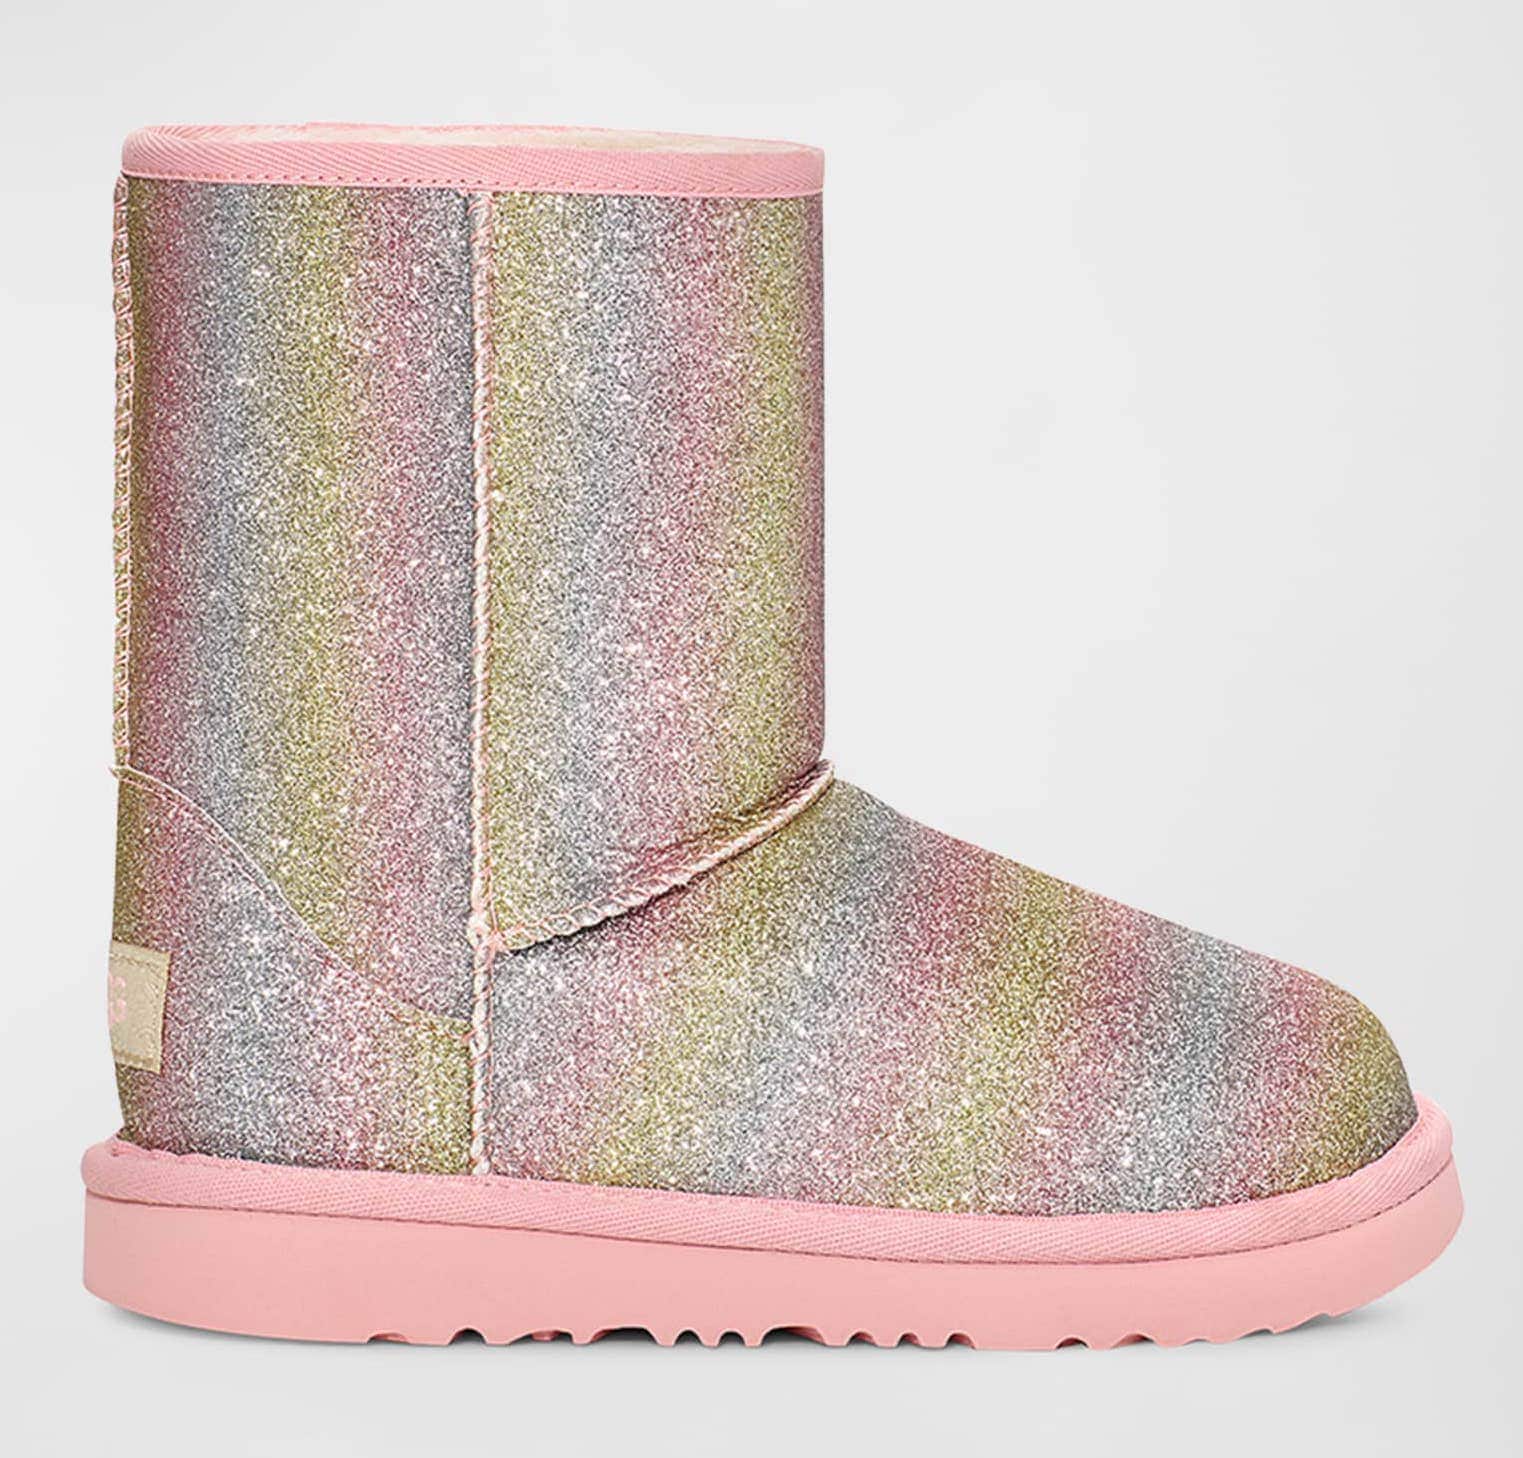 Pink and rainbow glitter UGG boots for kids